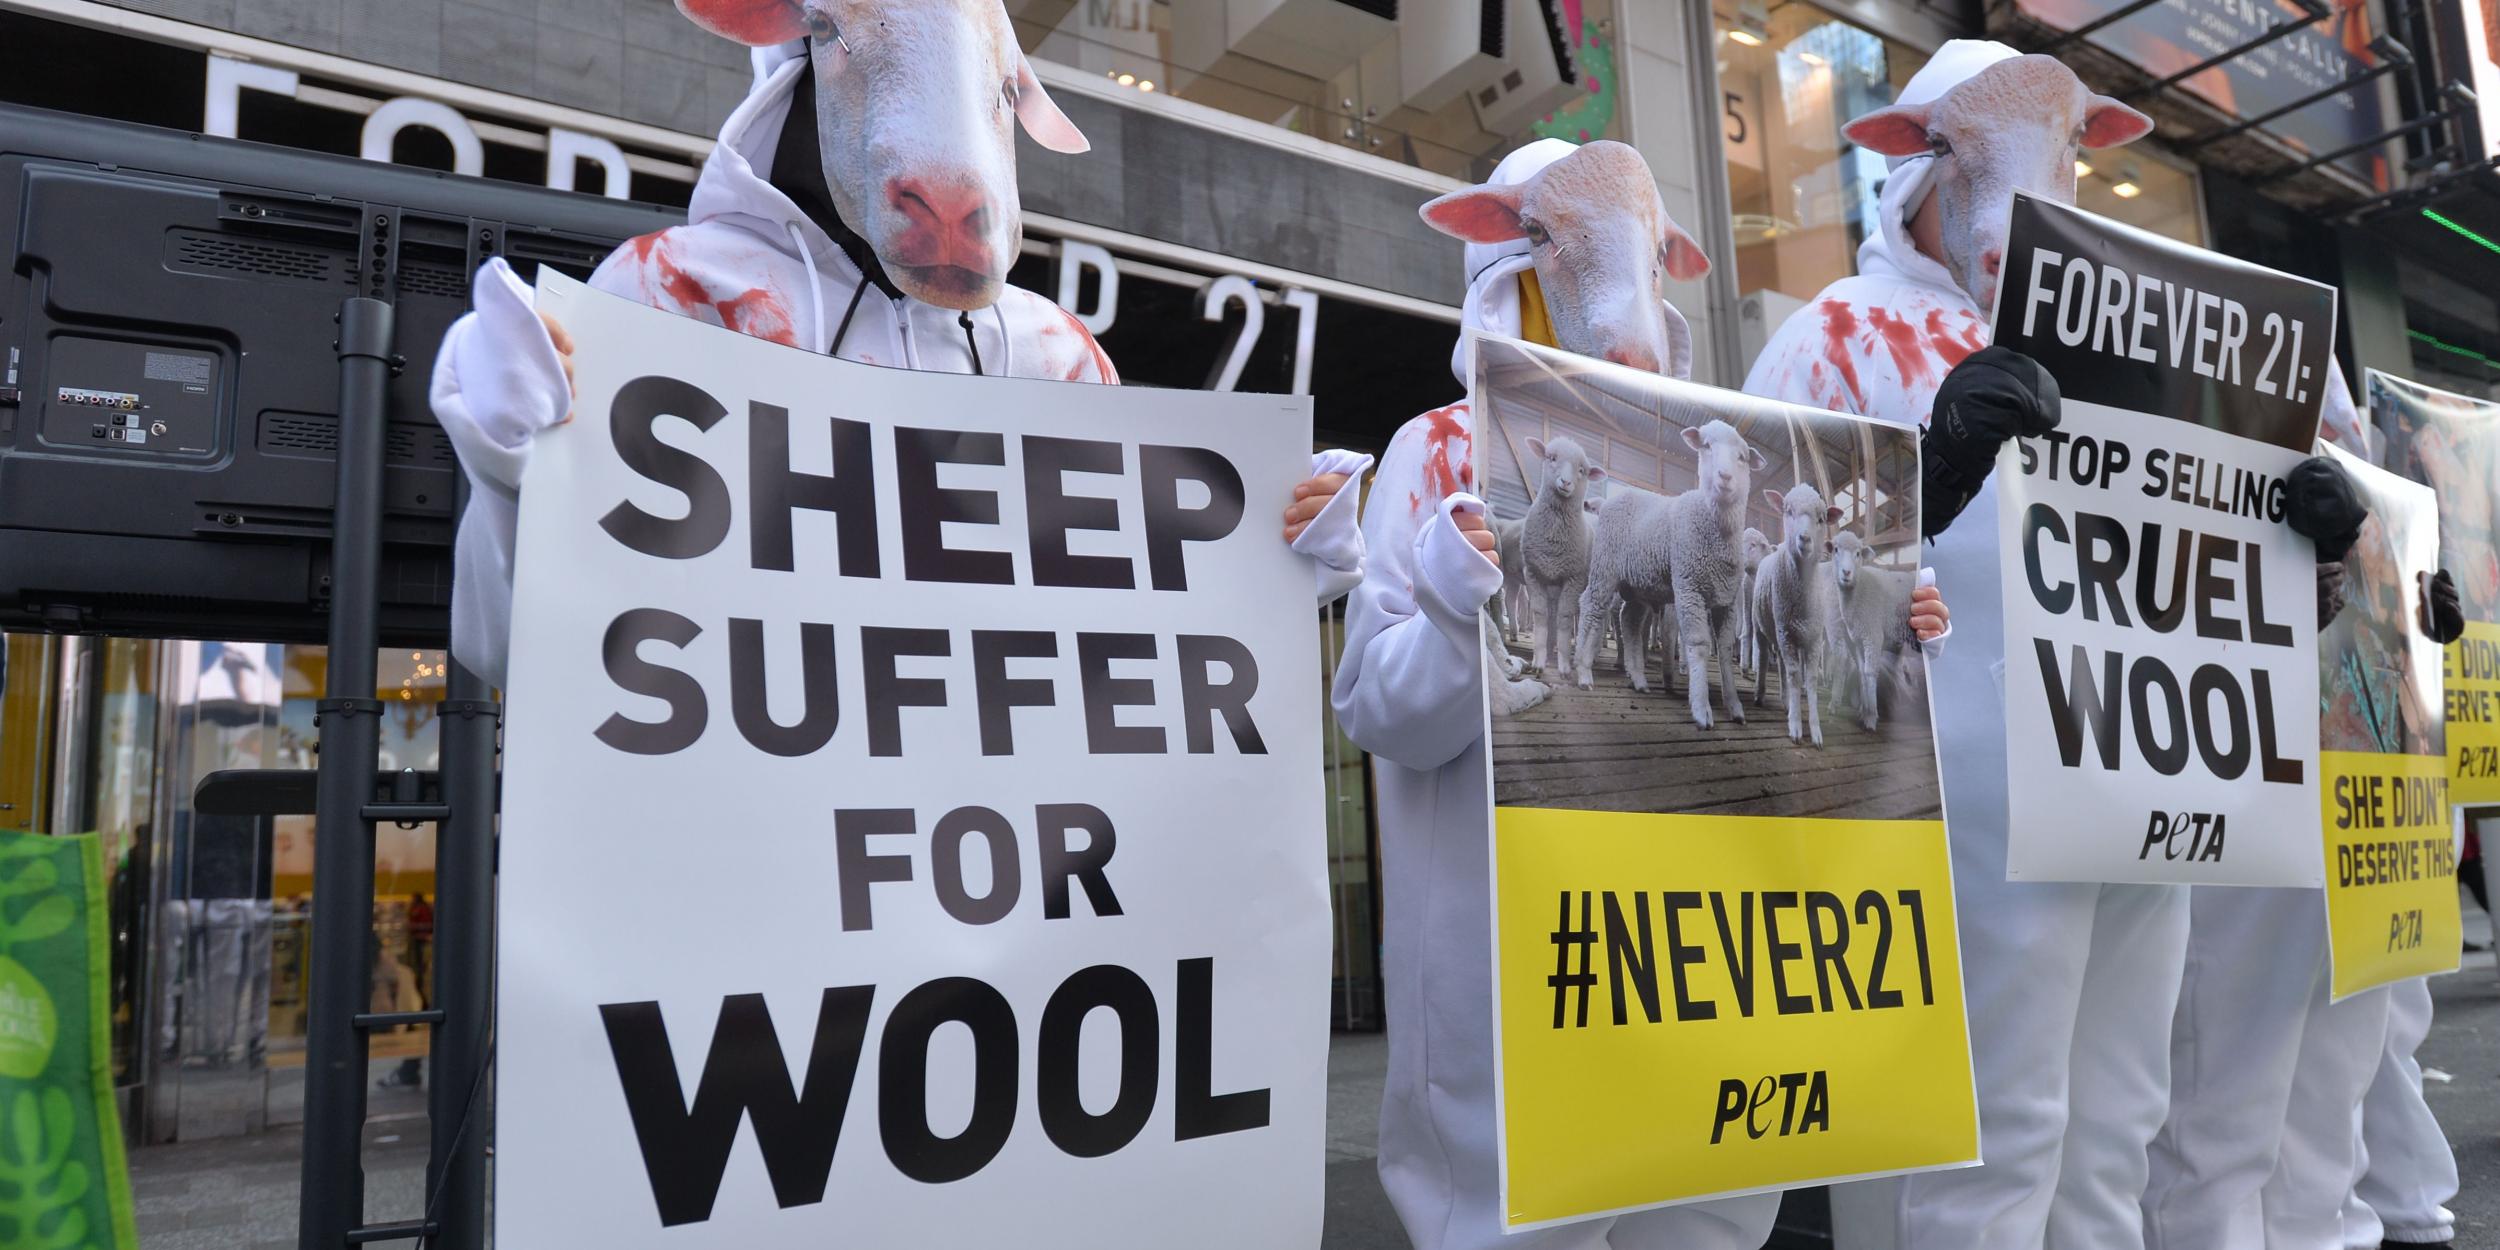 Vegan protesters say we should choose ‘cruelty-free’ products instead of wool and even want the village of Wool to change its name